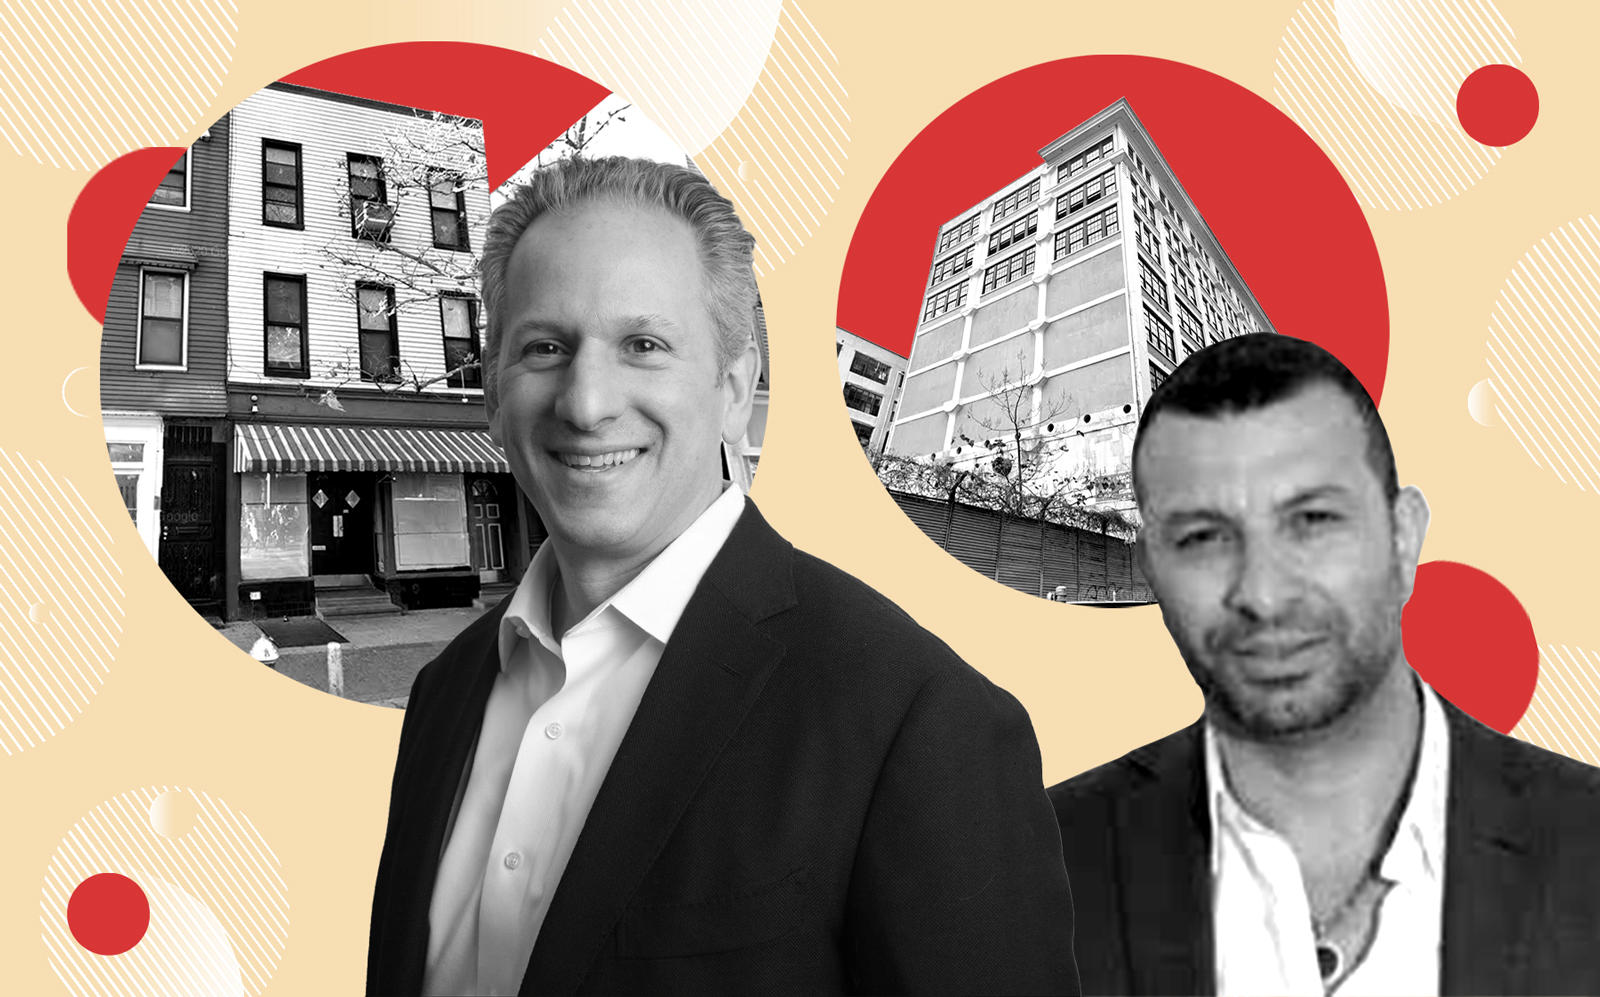 L3 Capital’s Domenic Lanni (left) with 188 Bedford Avenue and Sela Group's Gal Sela with 29 Ryerson Street (Photos via L3 Capital, LinkedIn, Google Maps)